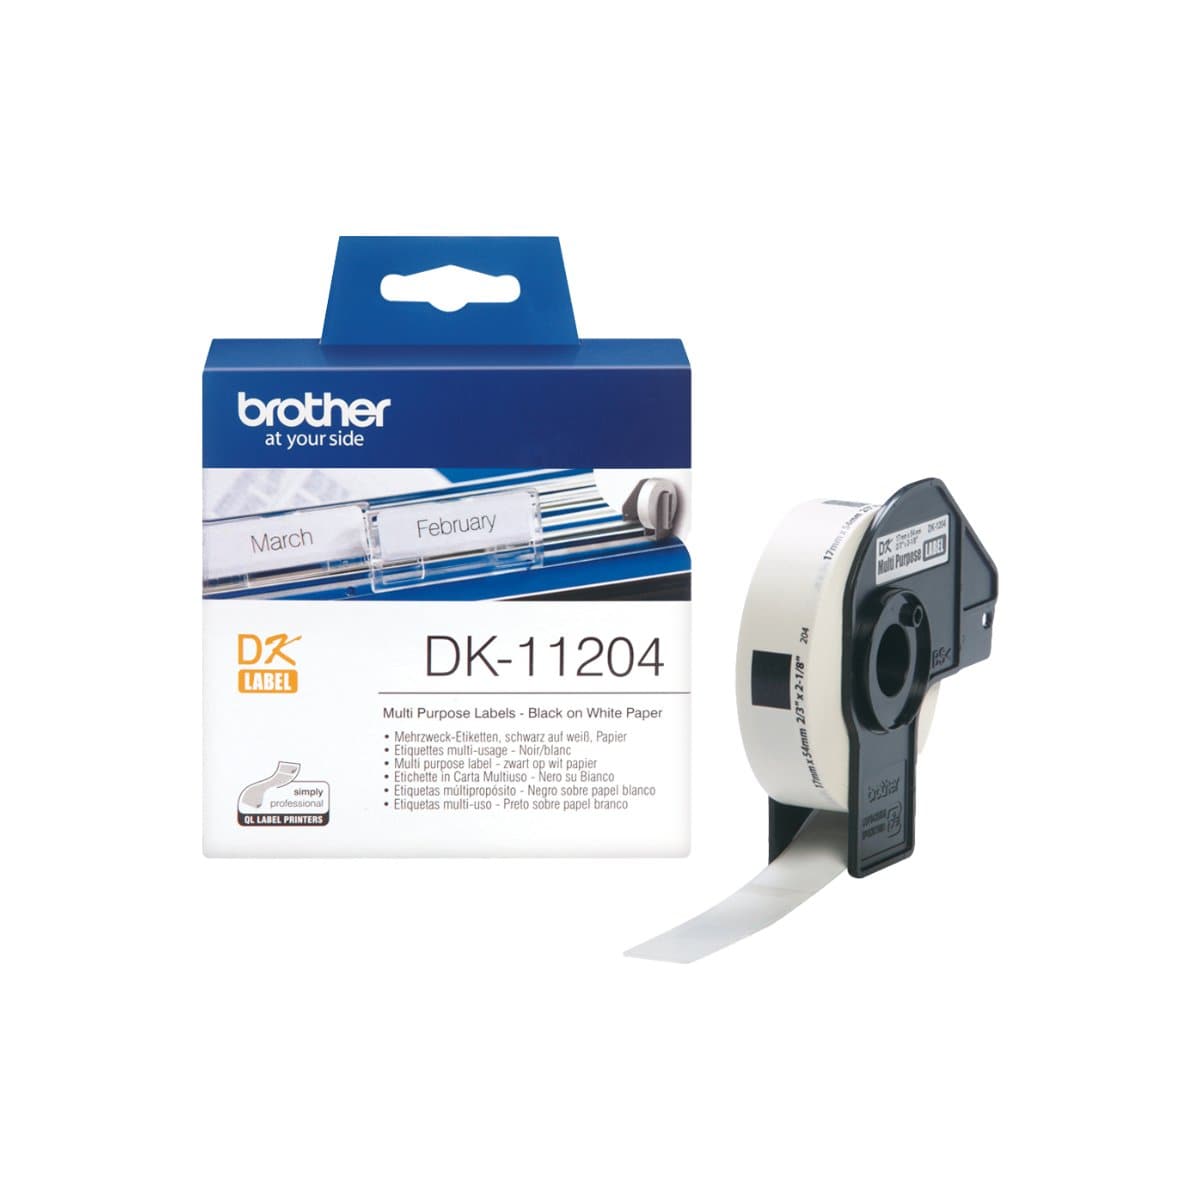 Brother DK-11204 Single Multi Purpose Labels, 17 x 54 mm, 400/roll, White